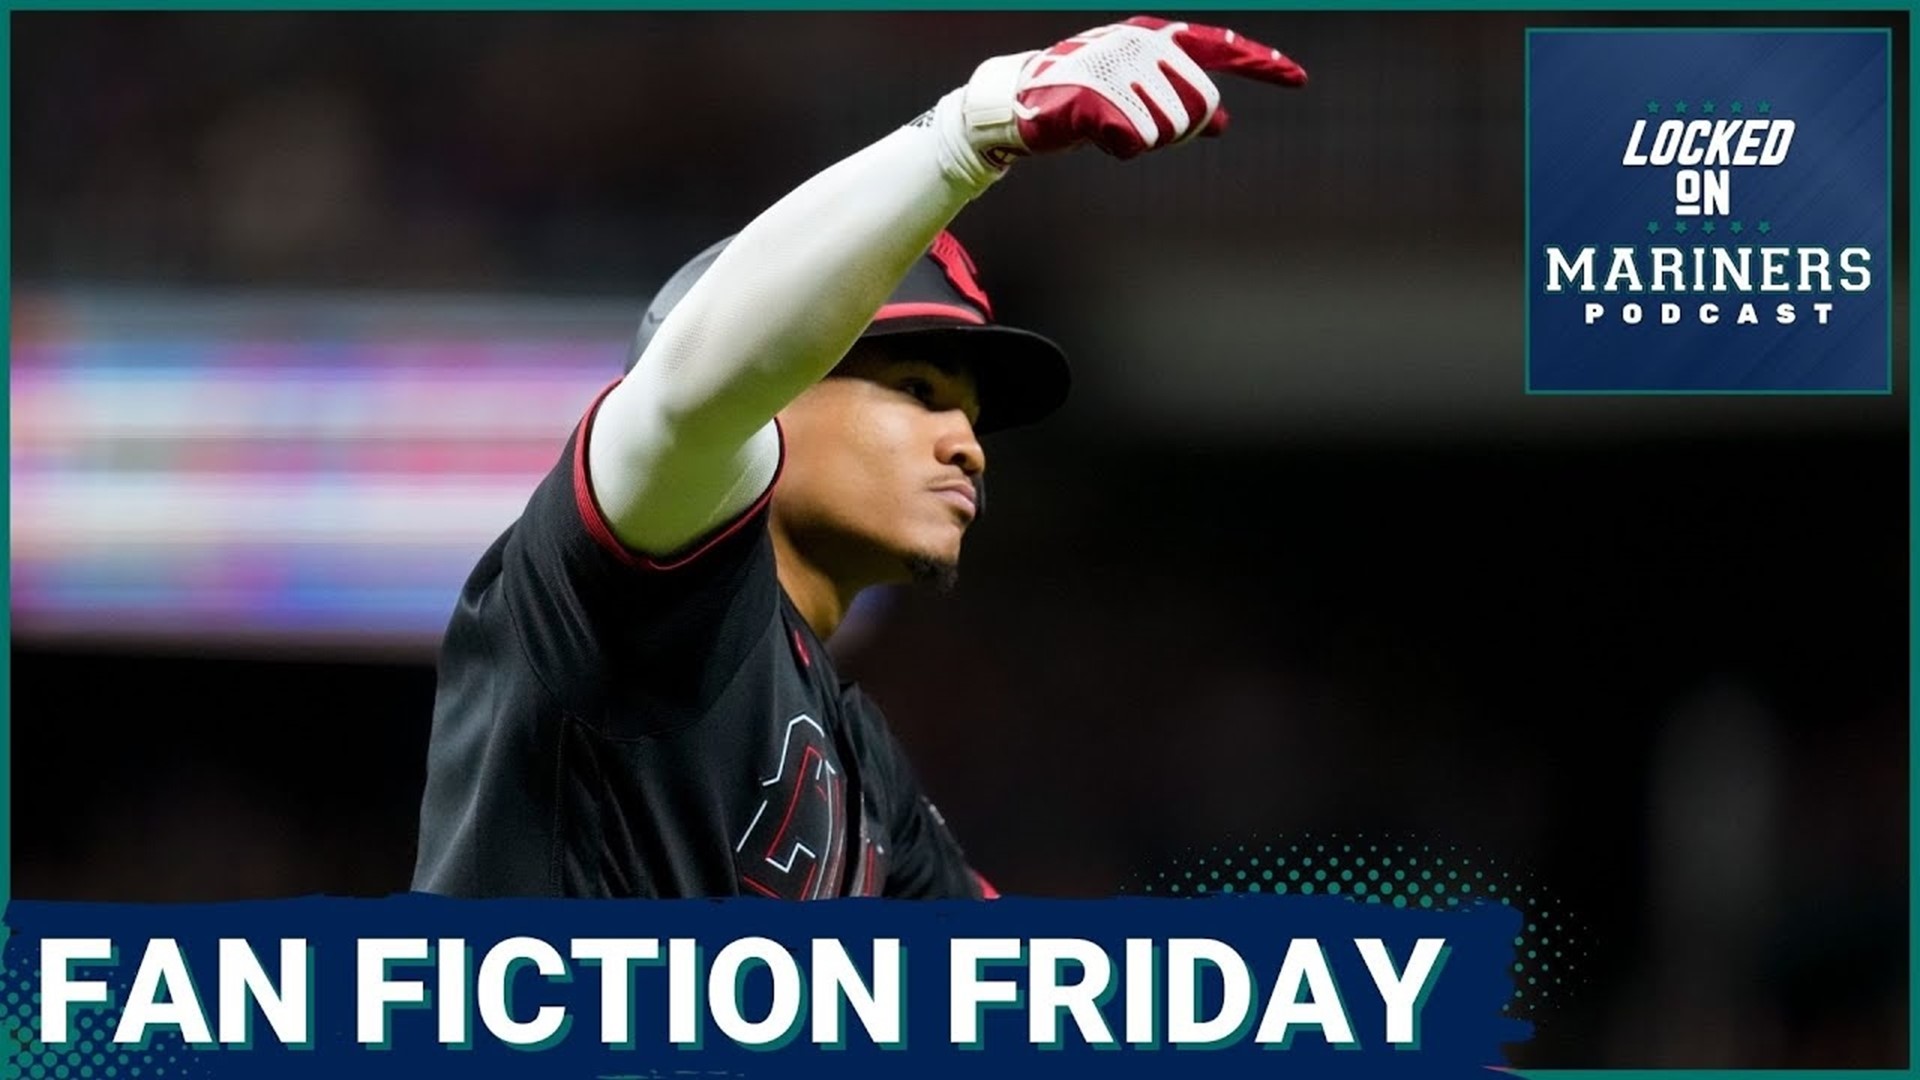 It's Fan Fiction Friday! Colby and Ty grade your Mariners trades, including proposals for Noelvi Marte, Yandy Diaz, Wilmer Flores, and more.